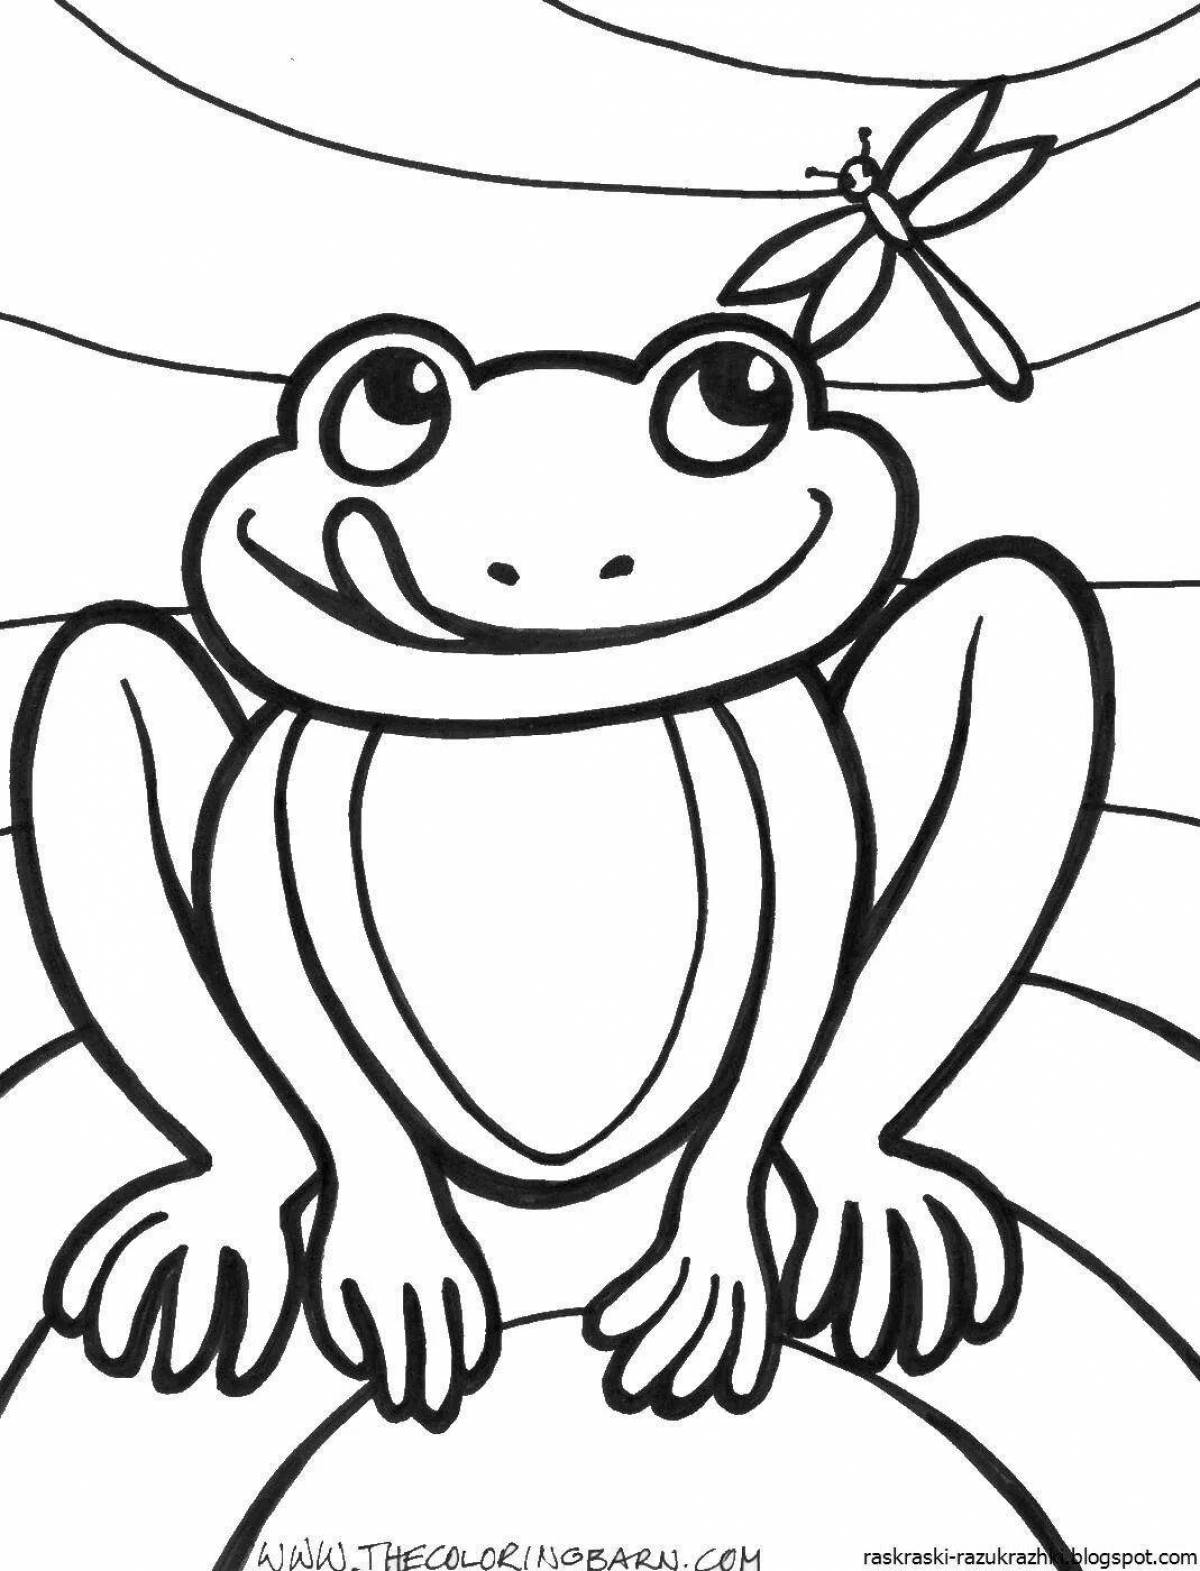 Funny frog coloring book for children 3-4 years old